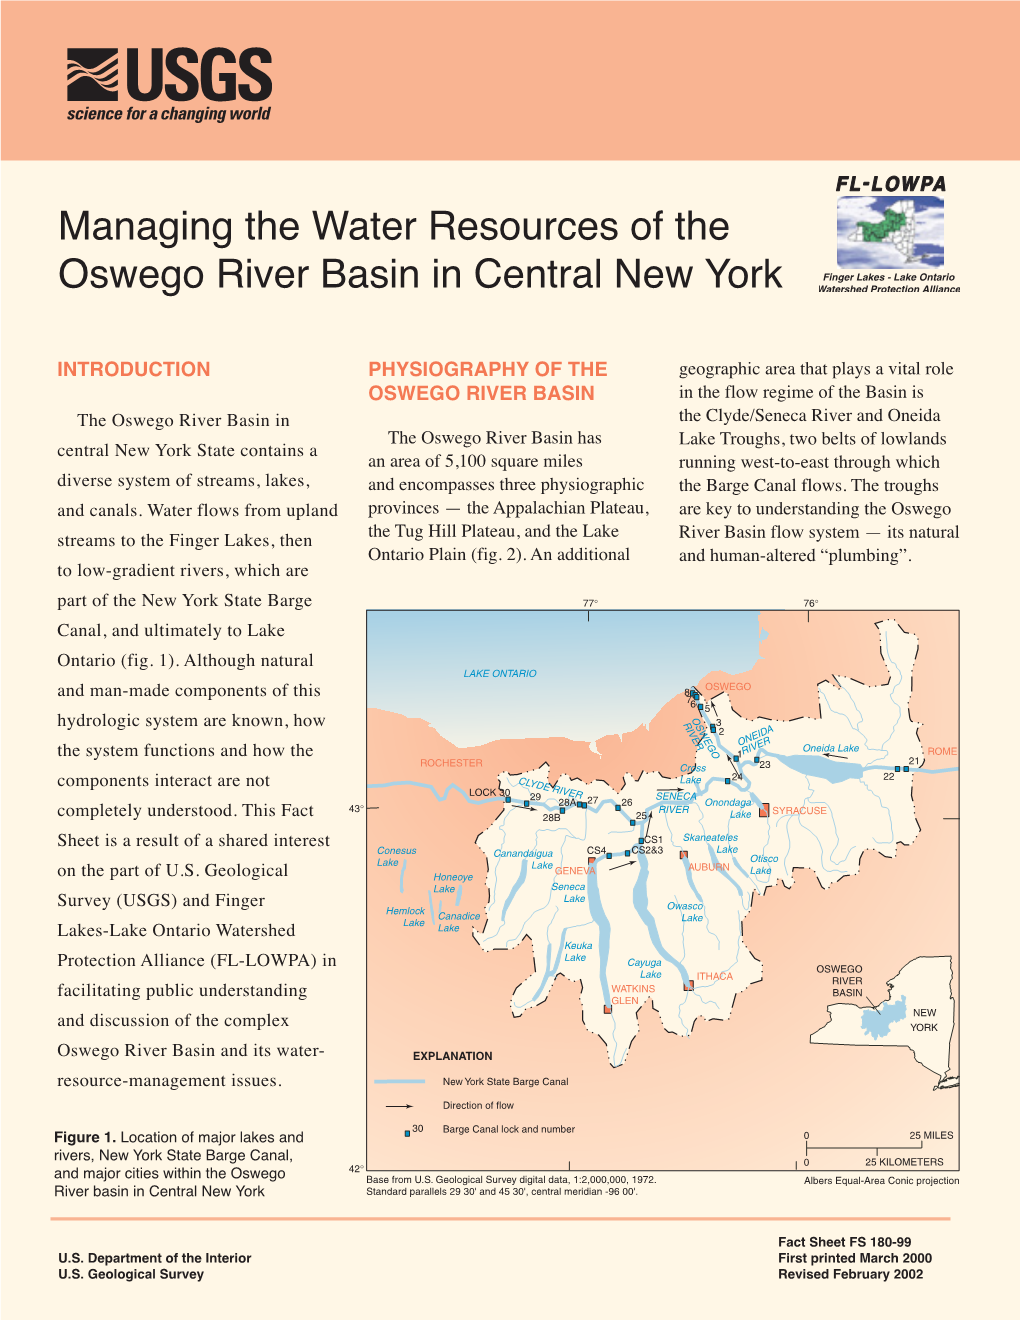 Managing the Water Resources of the Oswego River Basin in Central New York